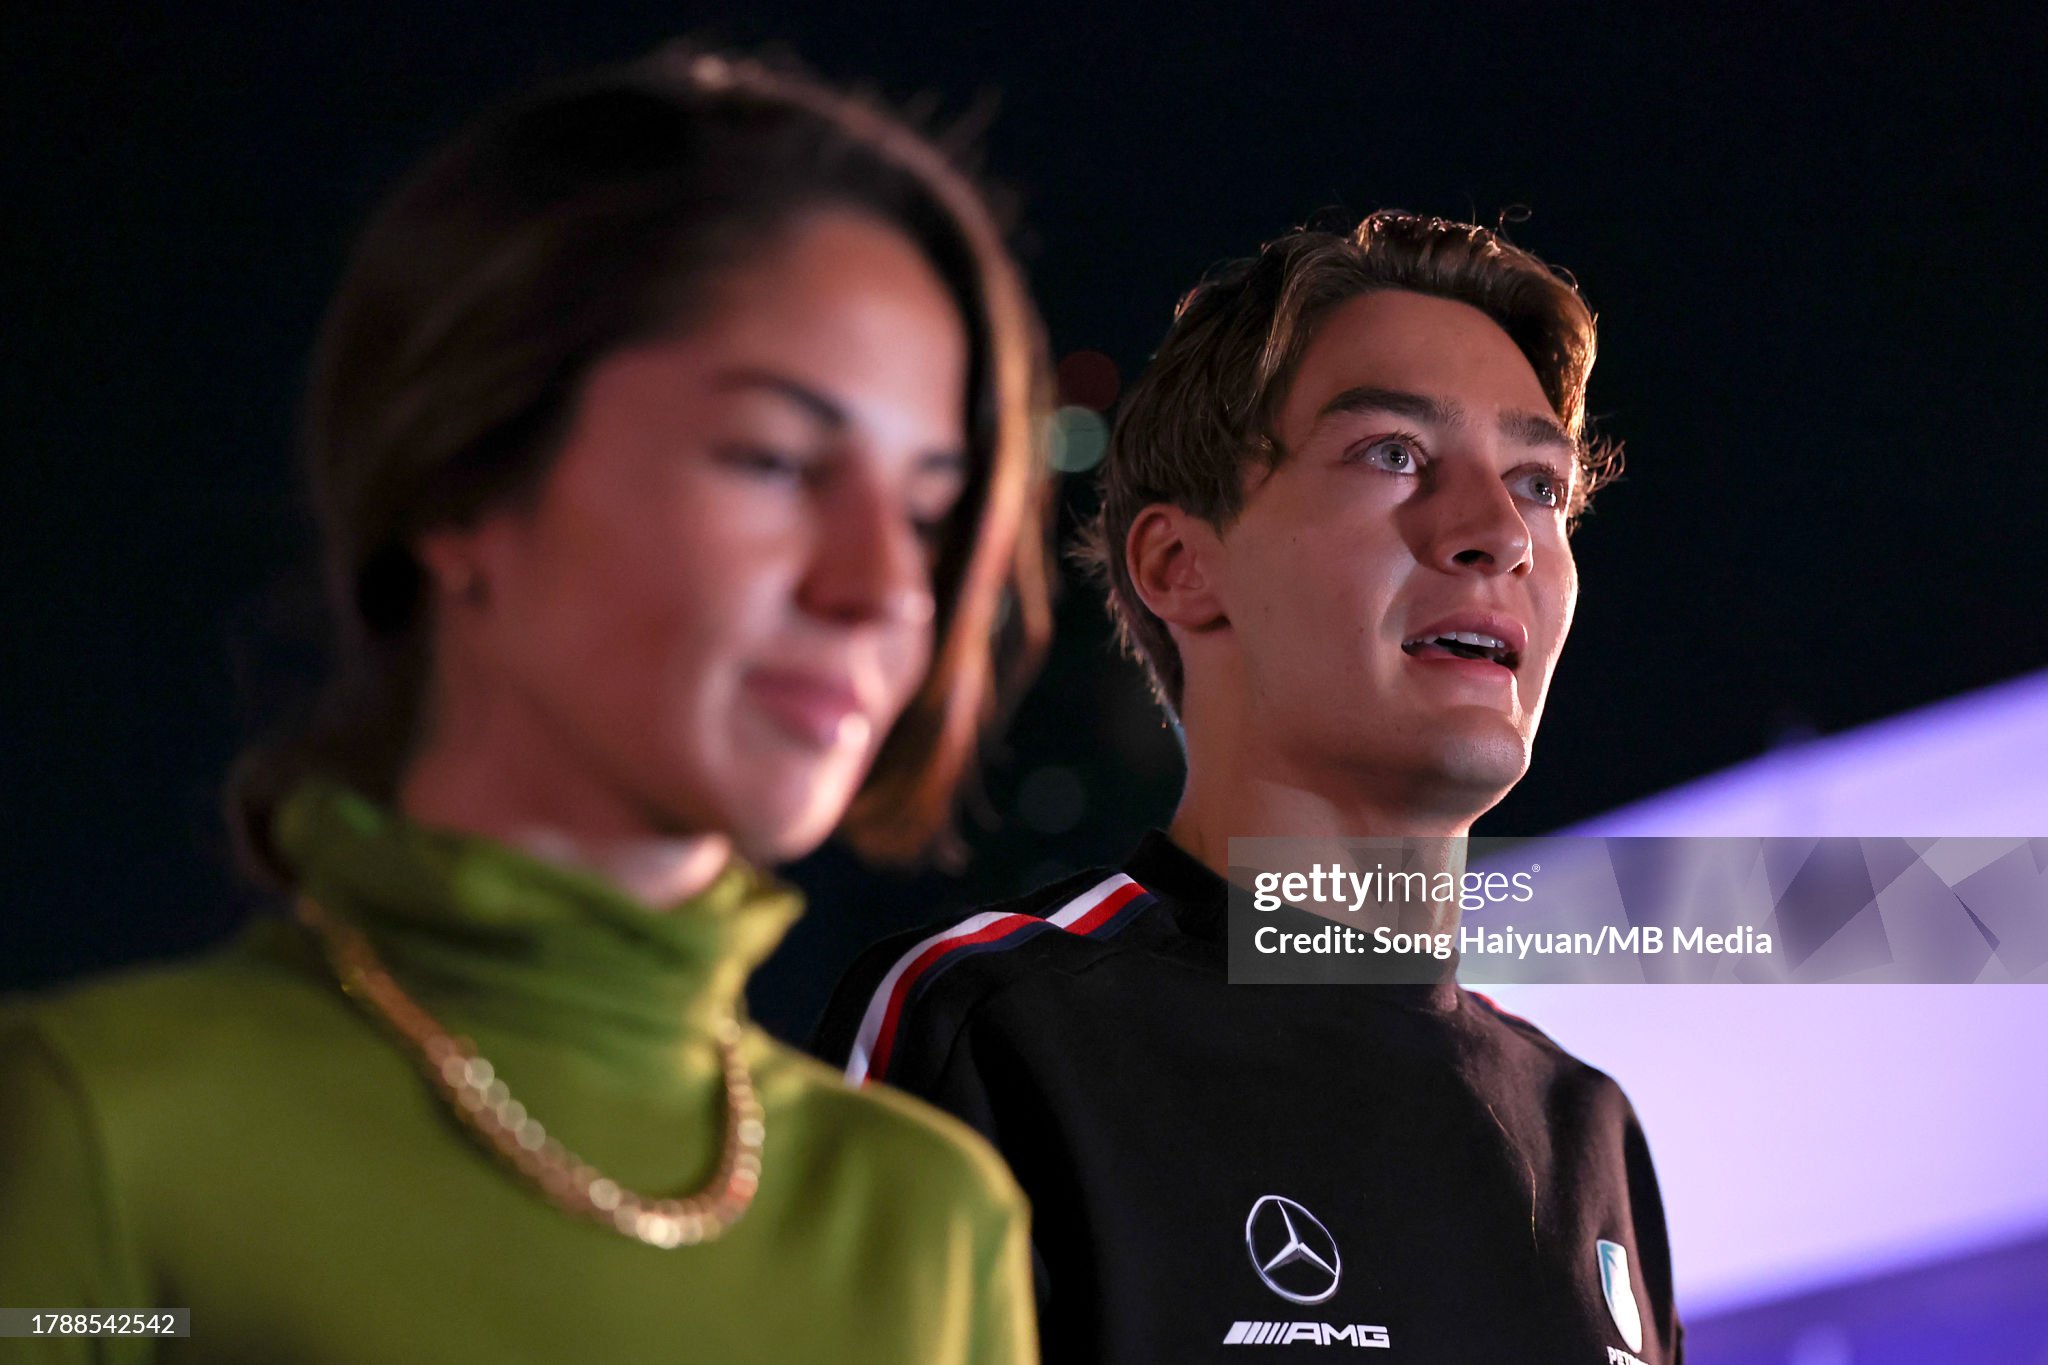 George Russell and Carmen Montero Mundt arrive at the track during qualifying ahead of the F1 Grand Prix of Las Vegas on 17 November 2023 in Las Vegas, Nevada. 